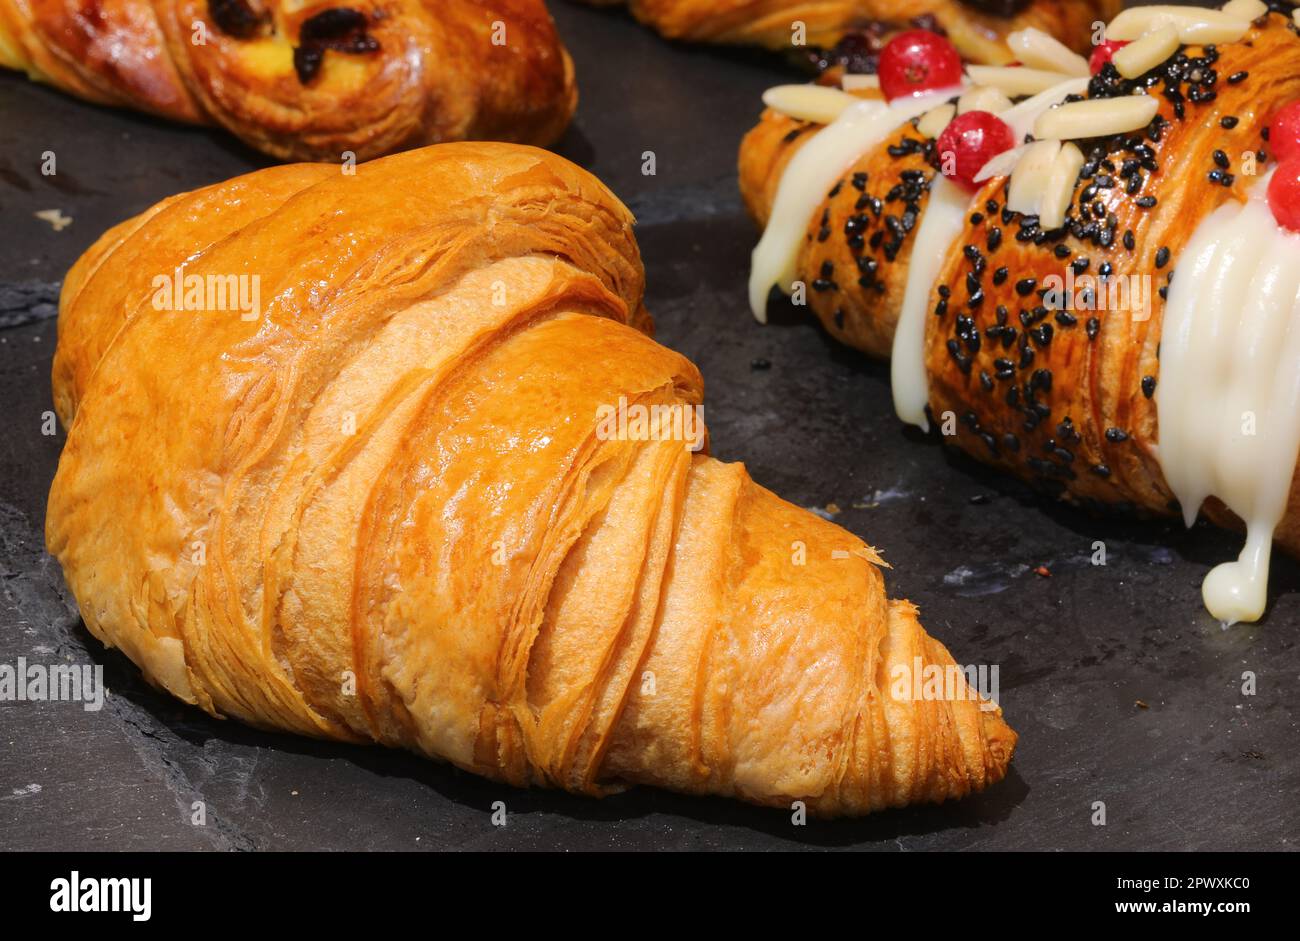 Baked brioche garnished with sweet icing and fresh fruit for sale in the bakery Stock Photo